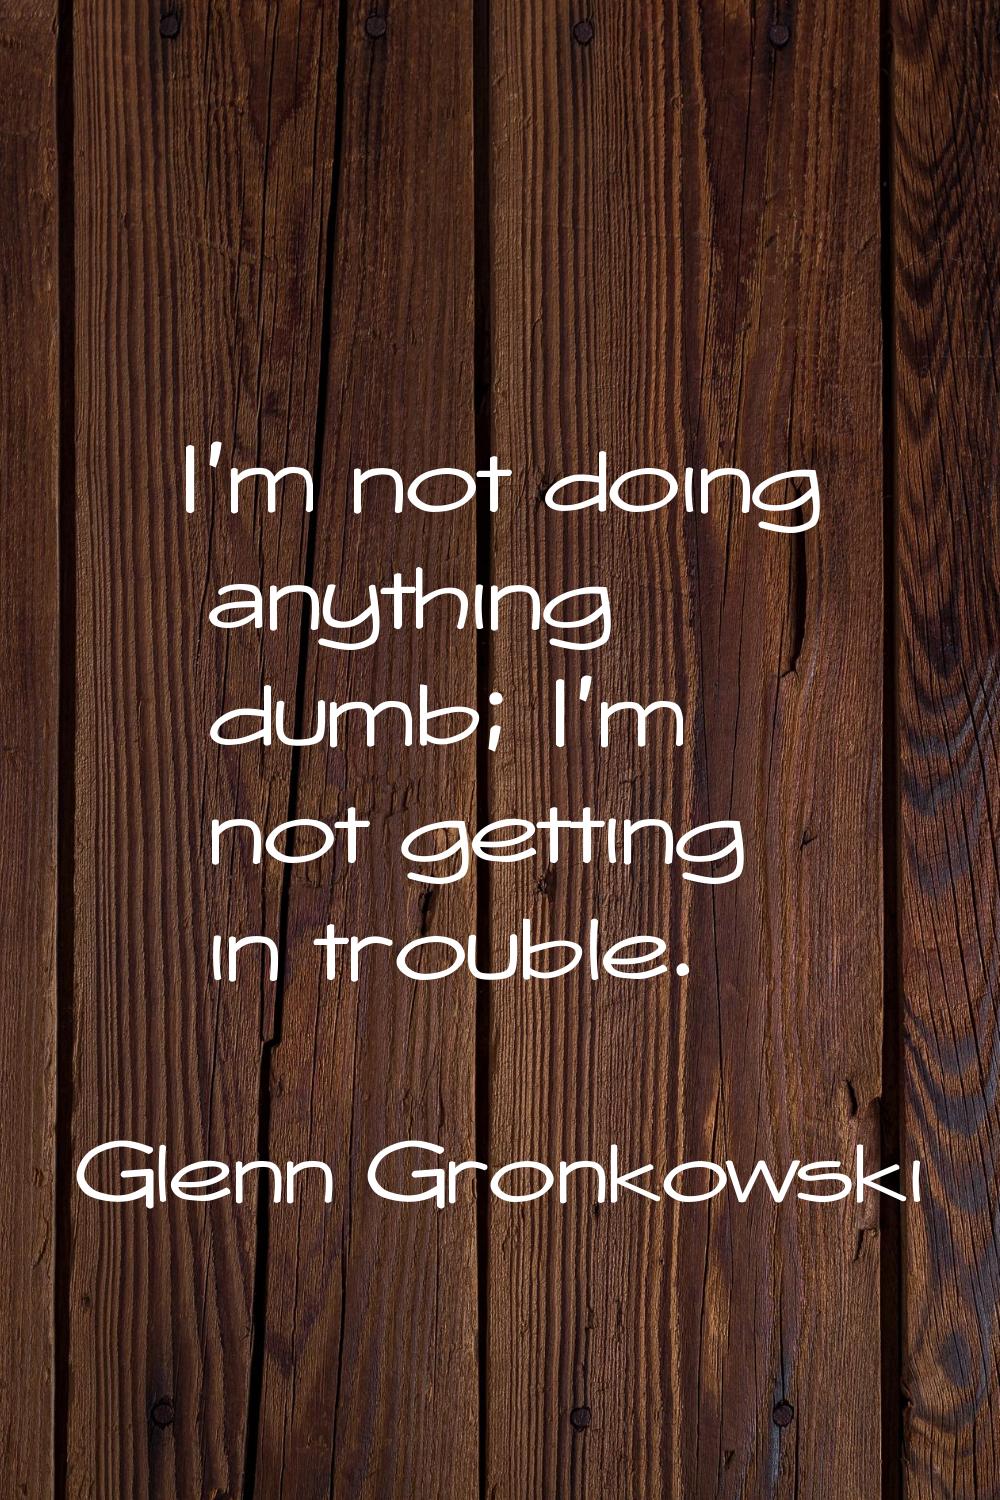 I'm not doing anything dumb; I'm not getting in trouble.